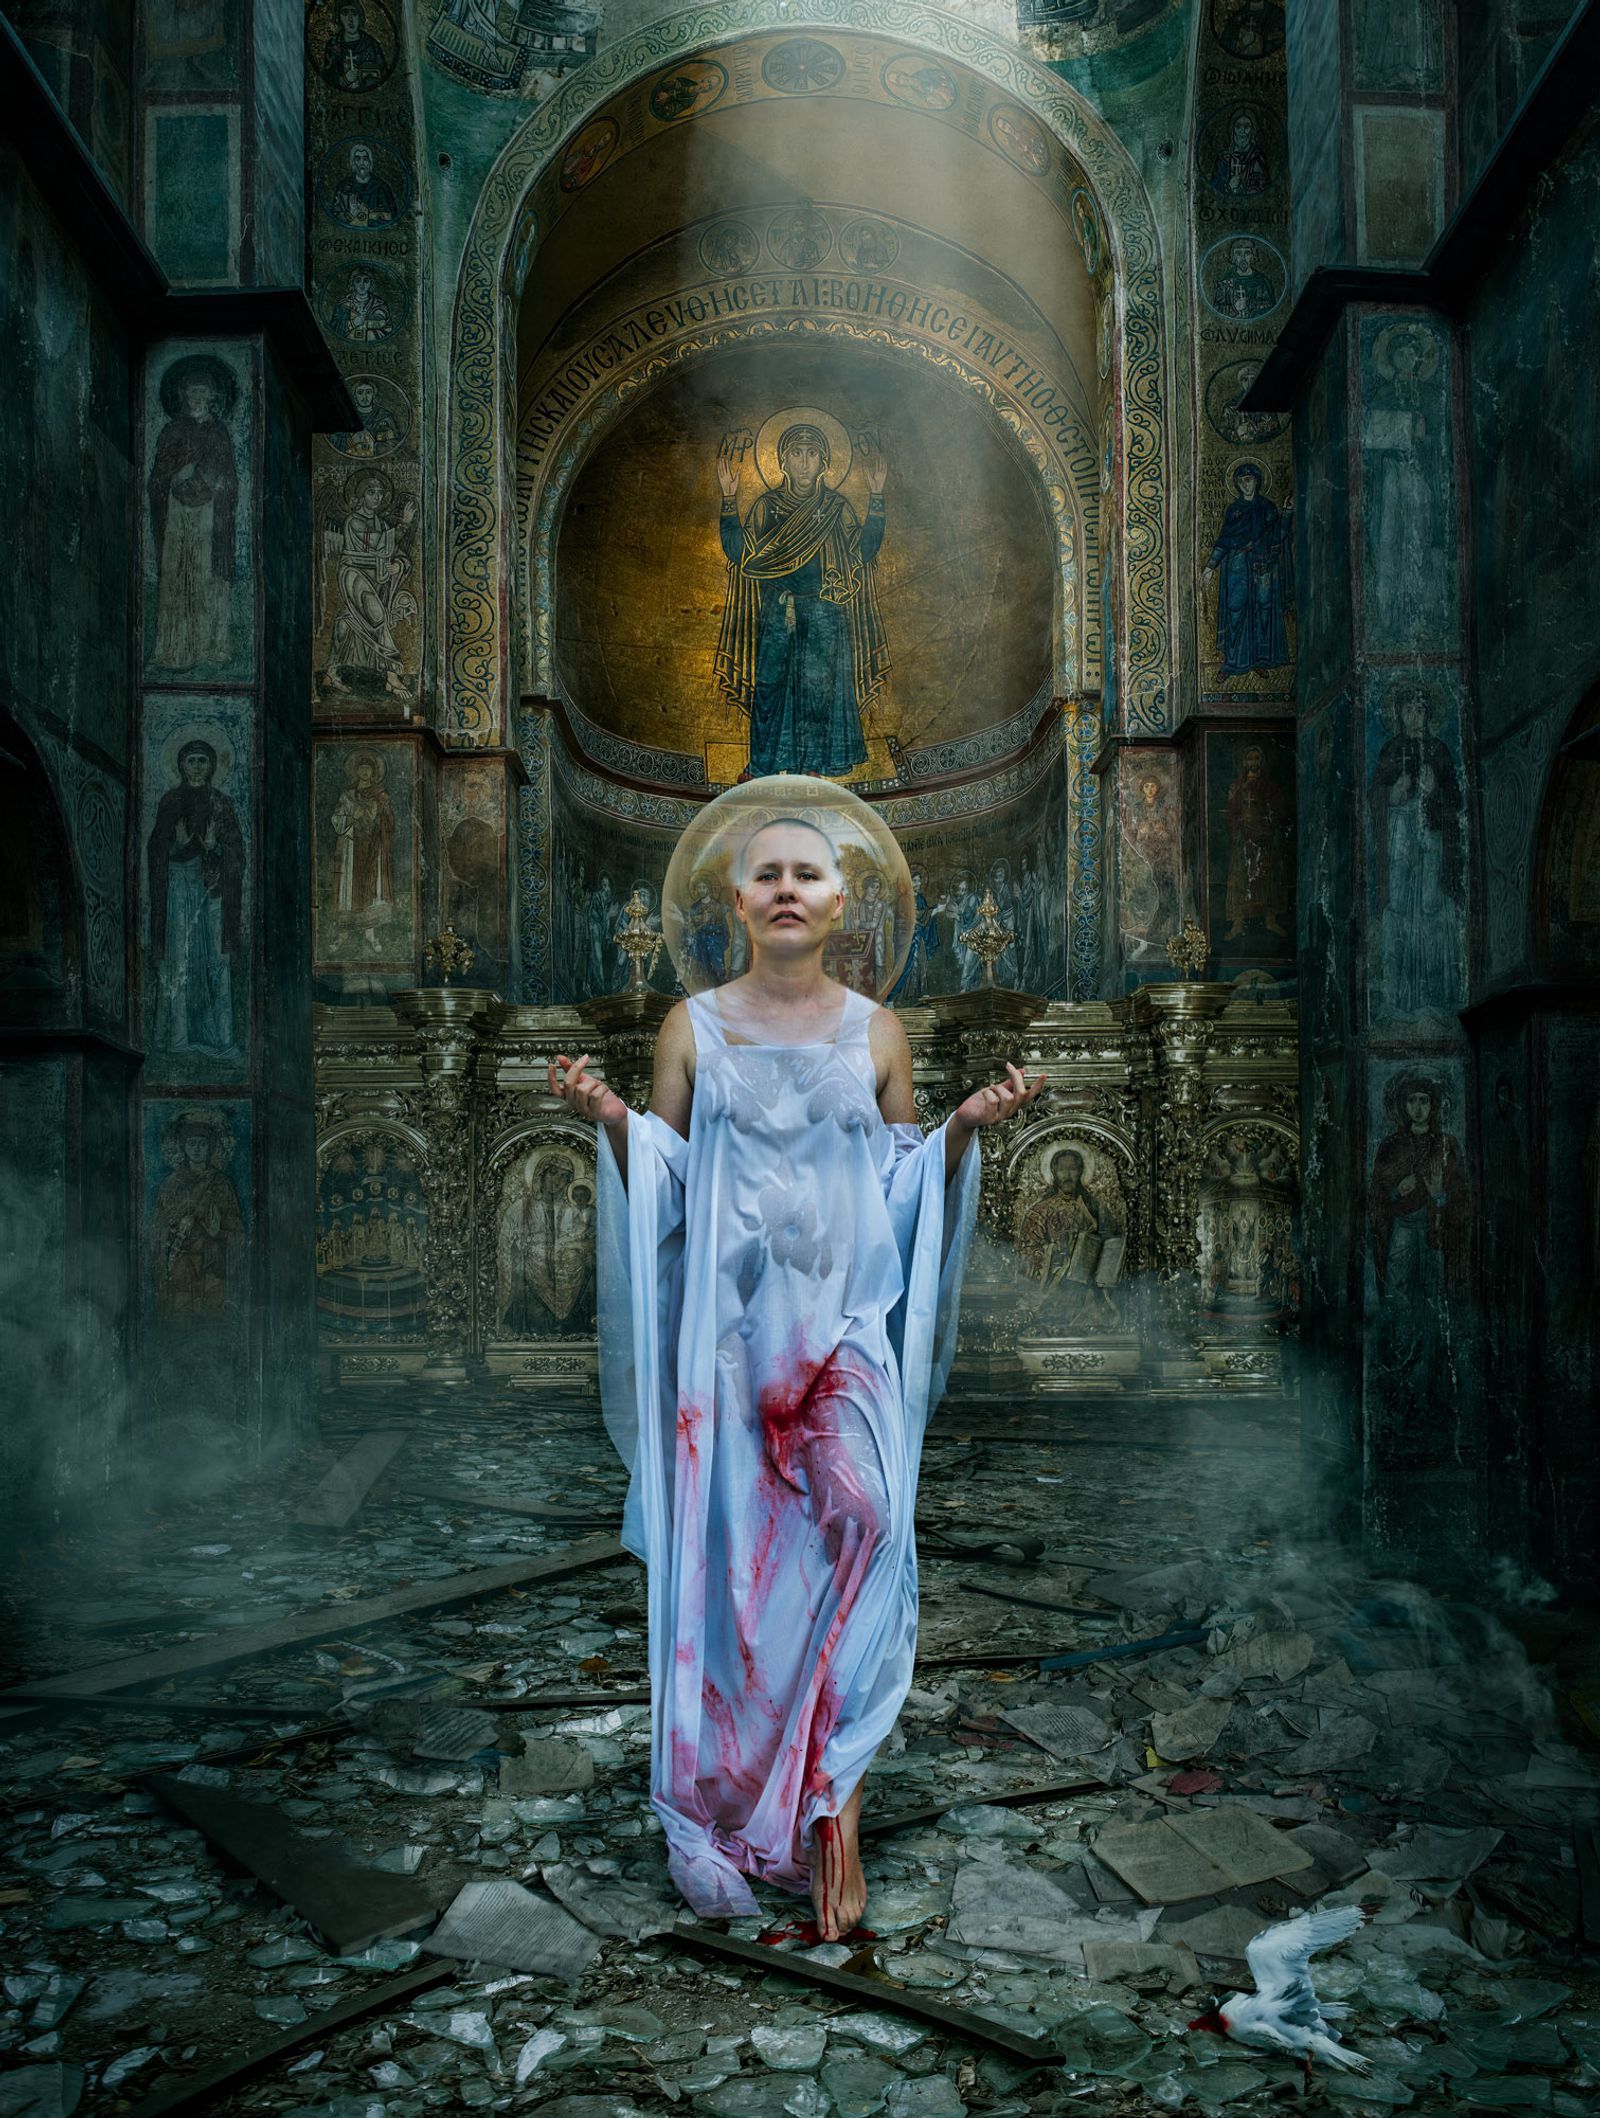 © Dina Bova - Image from the It's a Mad World photography project